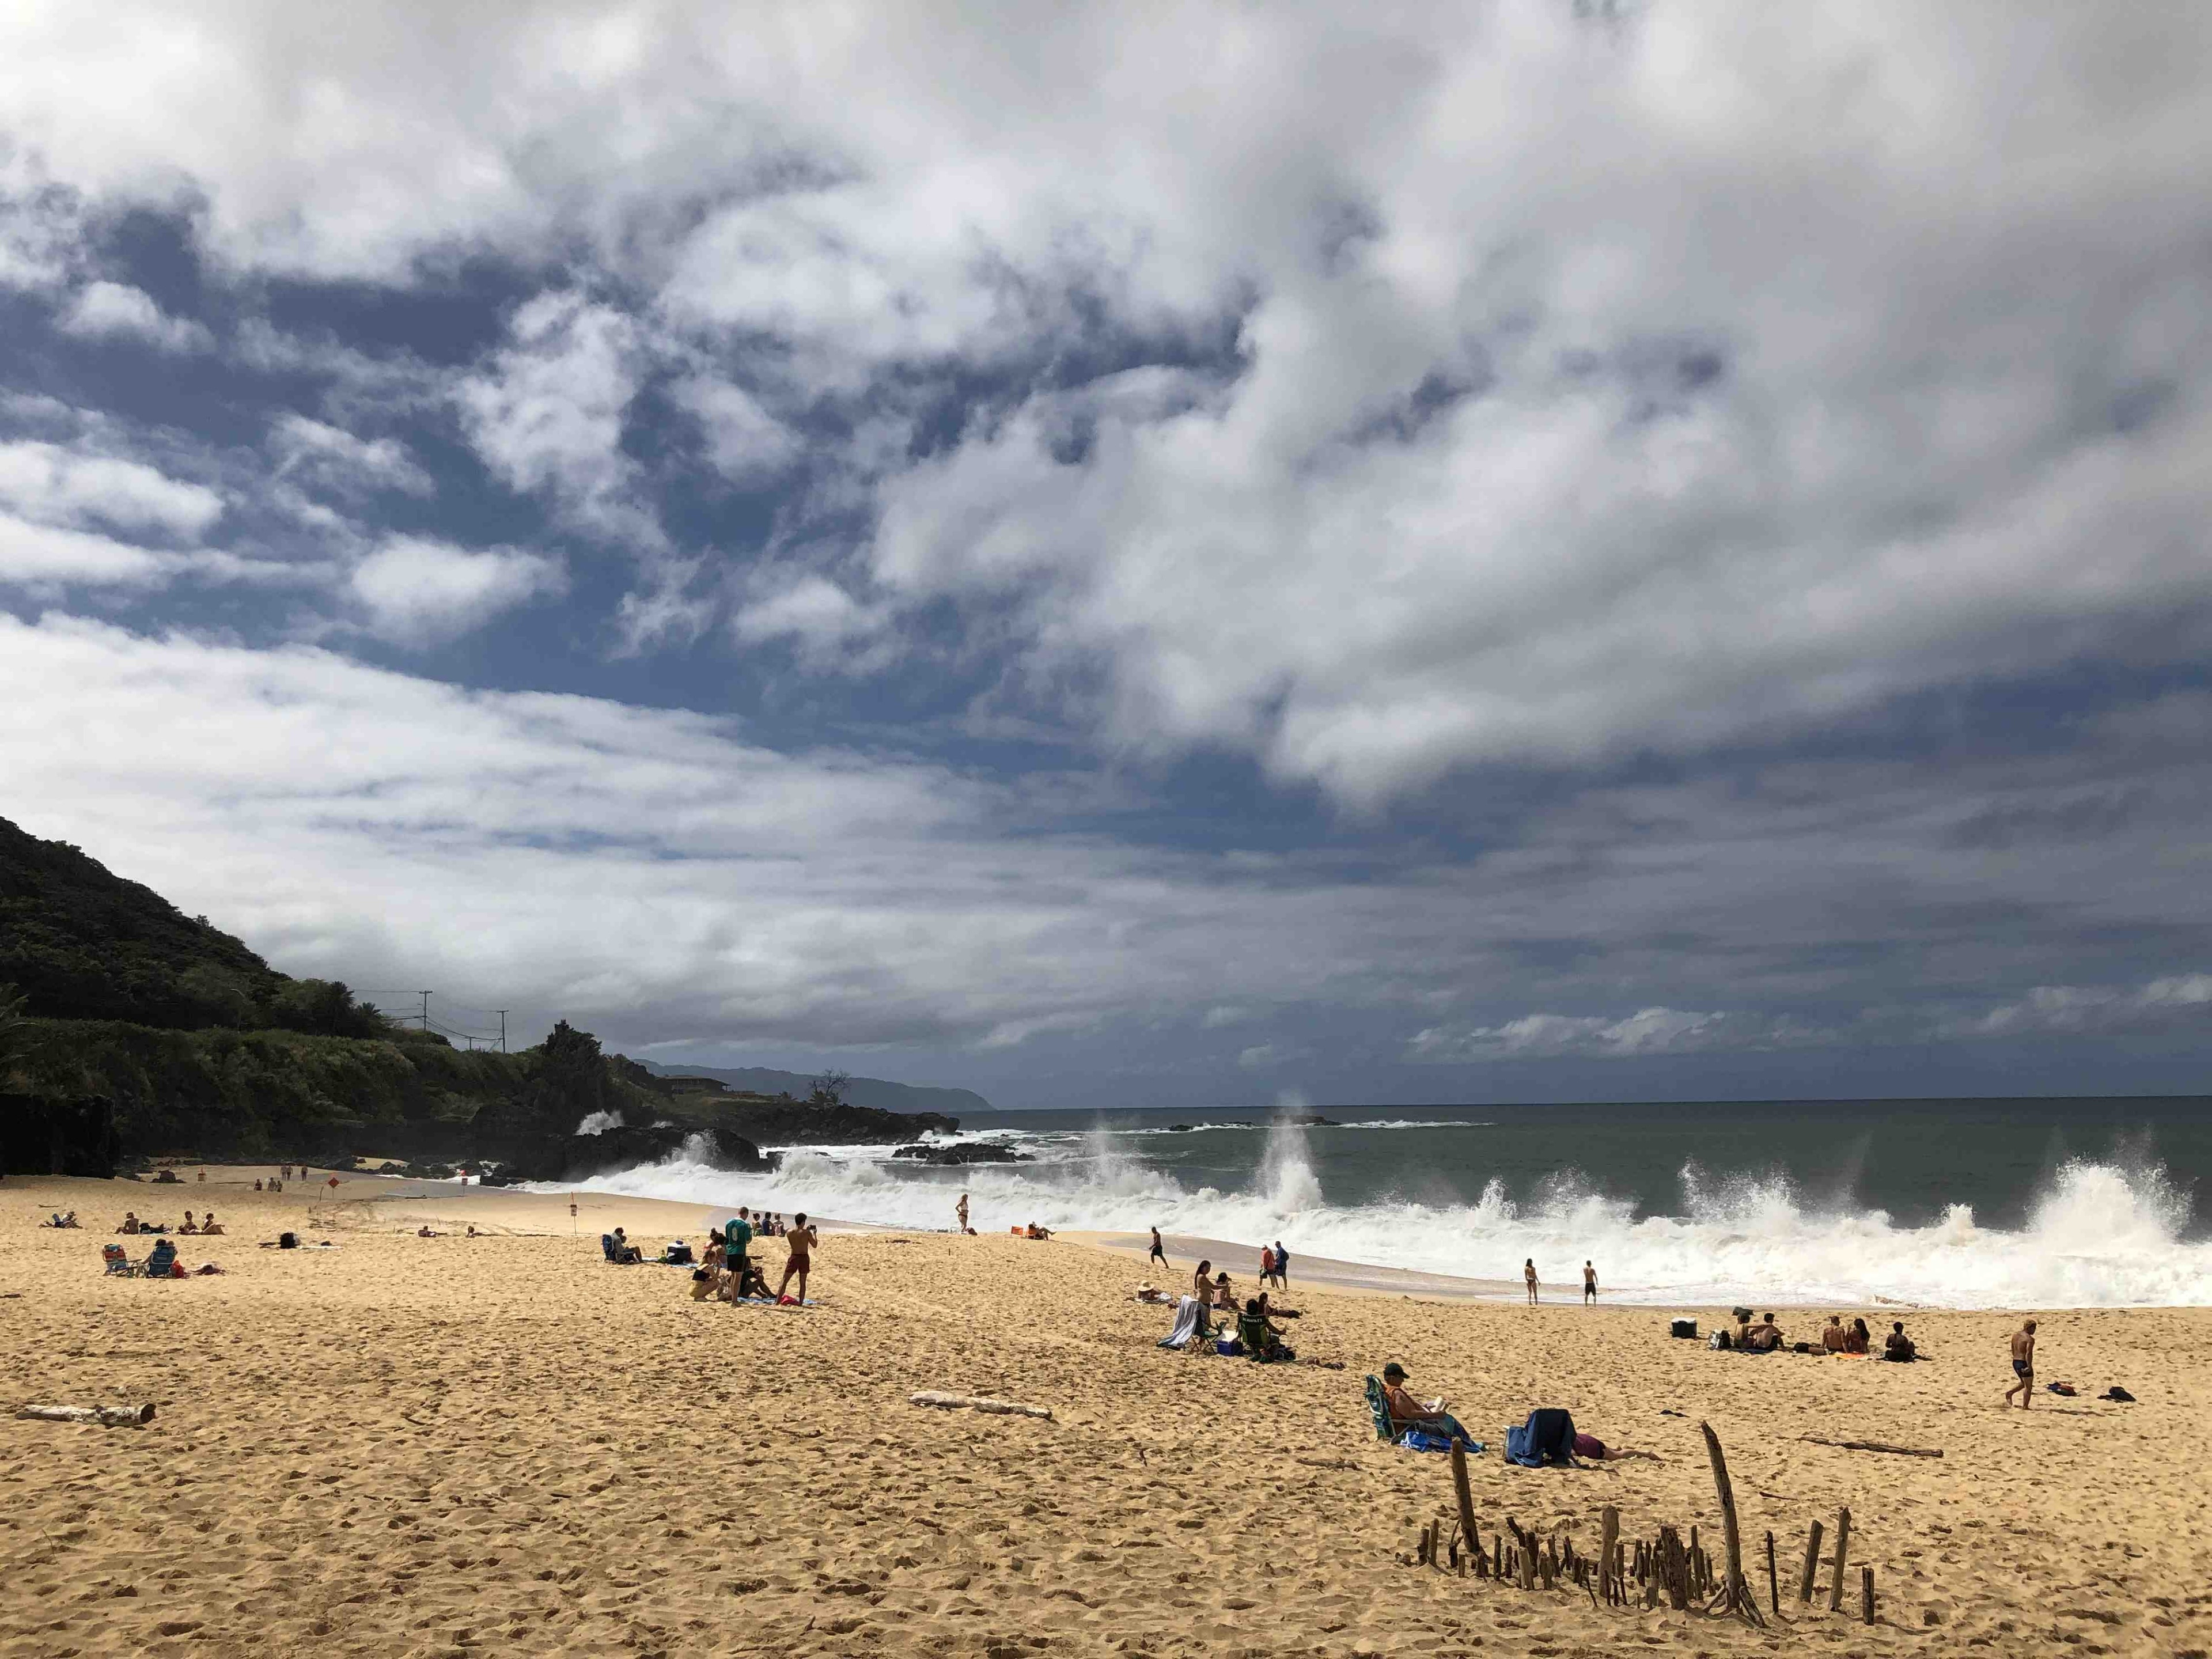 Not a day to let the kiddies swim (according to the lifeguard) as there were sets of very strong waves! Beautiful North Shore beach! #Waimea #Oahu #Hawaii